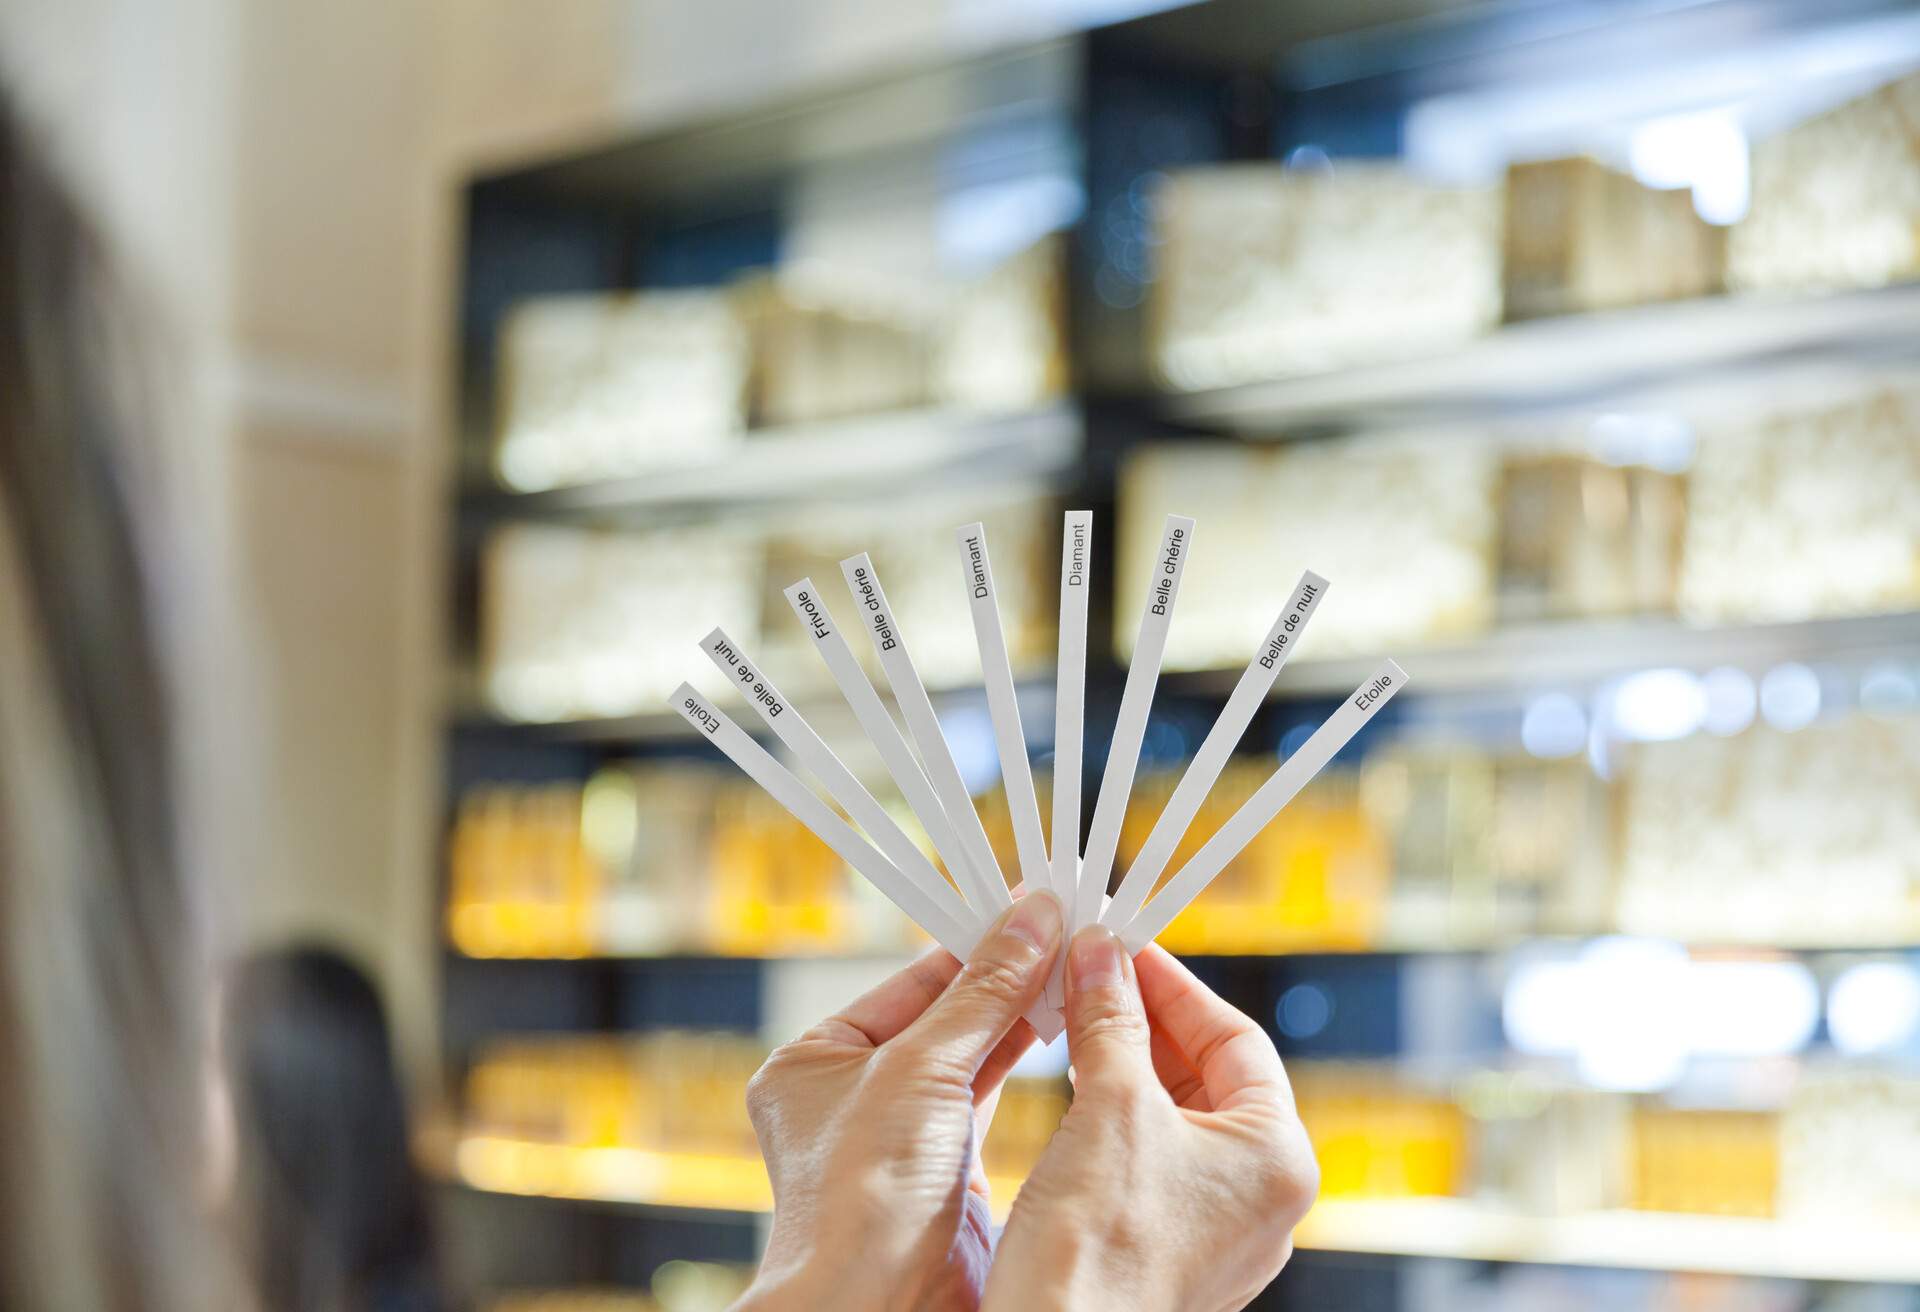 Hands showing a set of different perfume test strips inside a boutique shop.